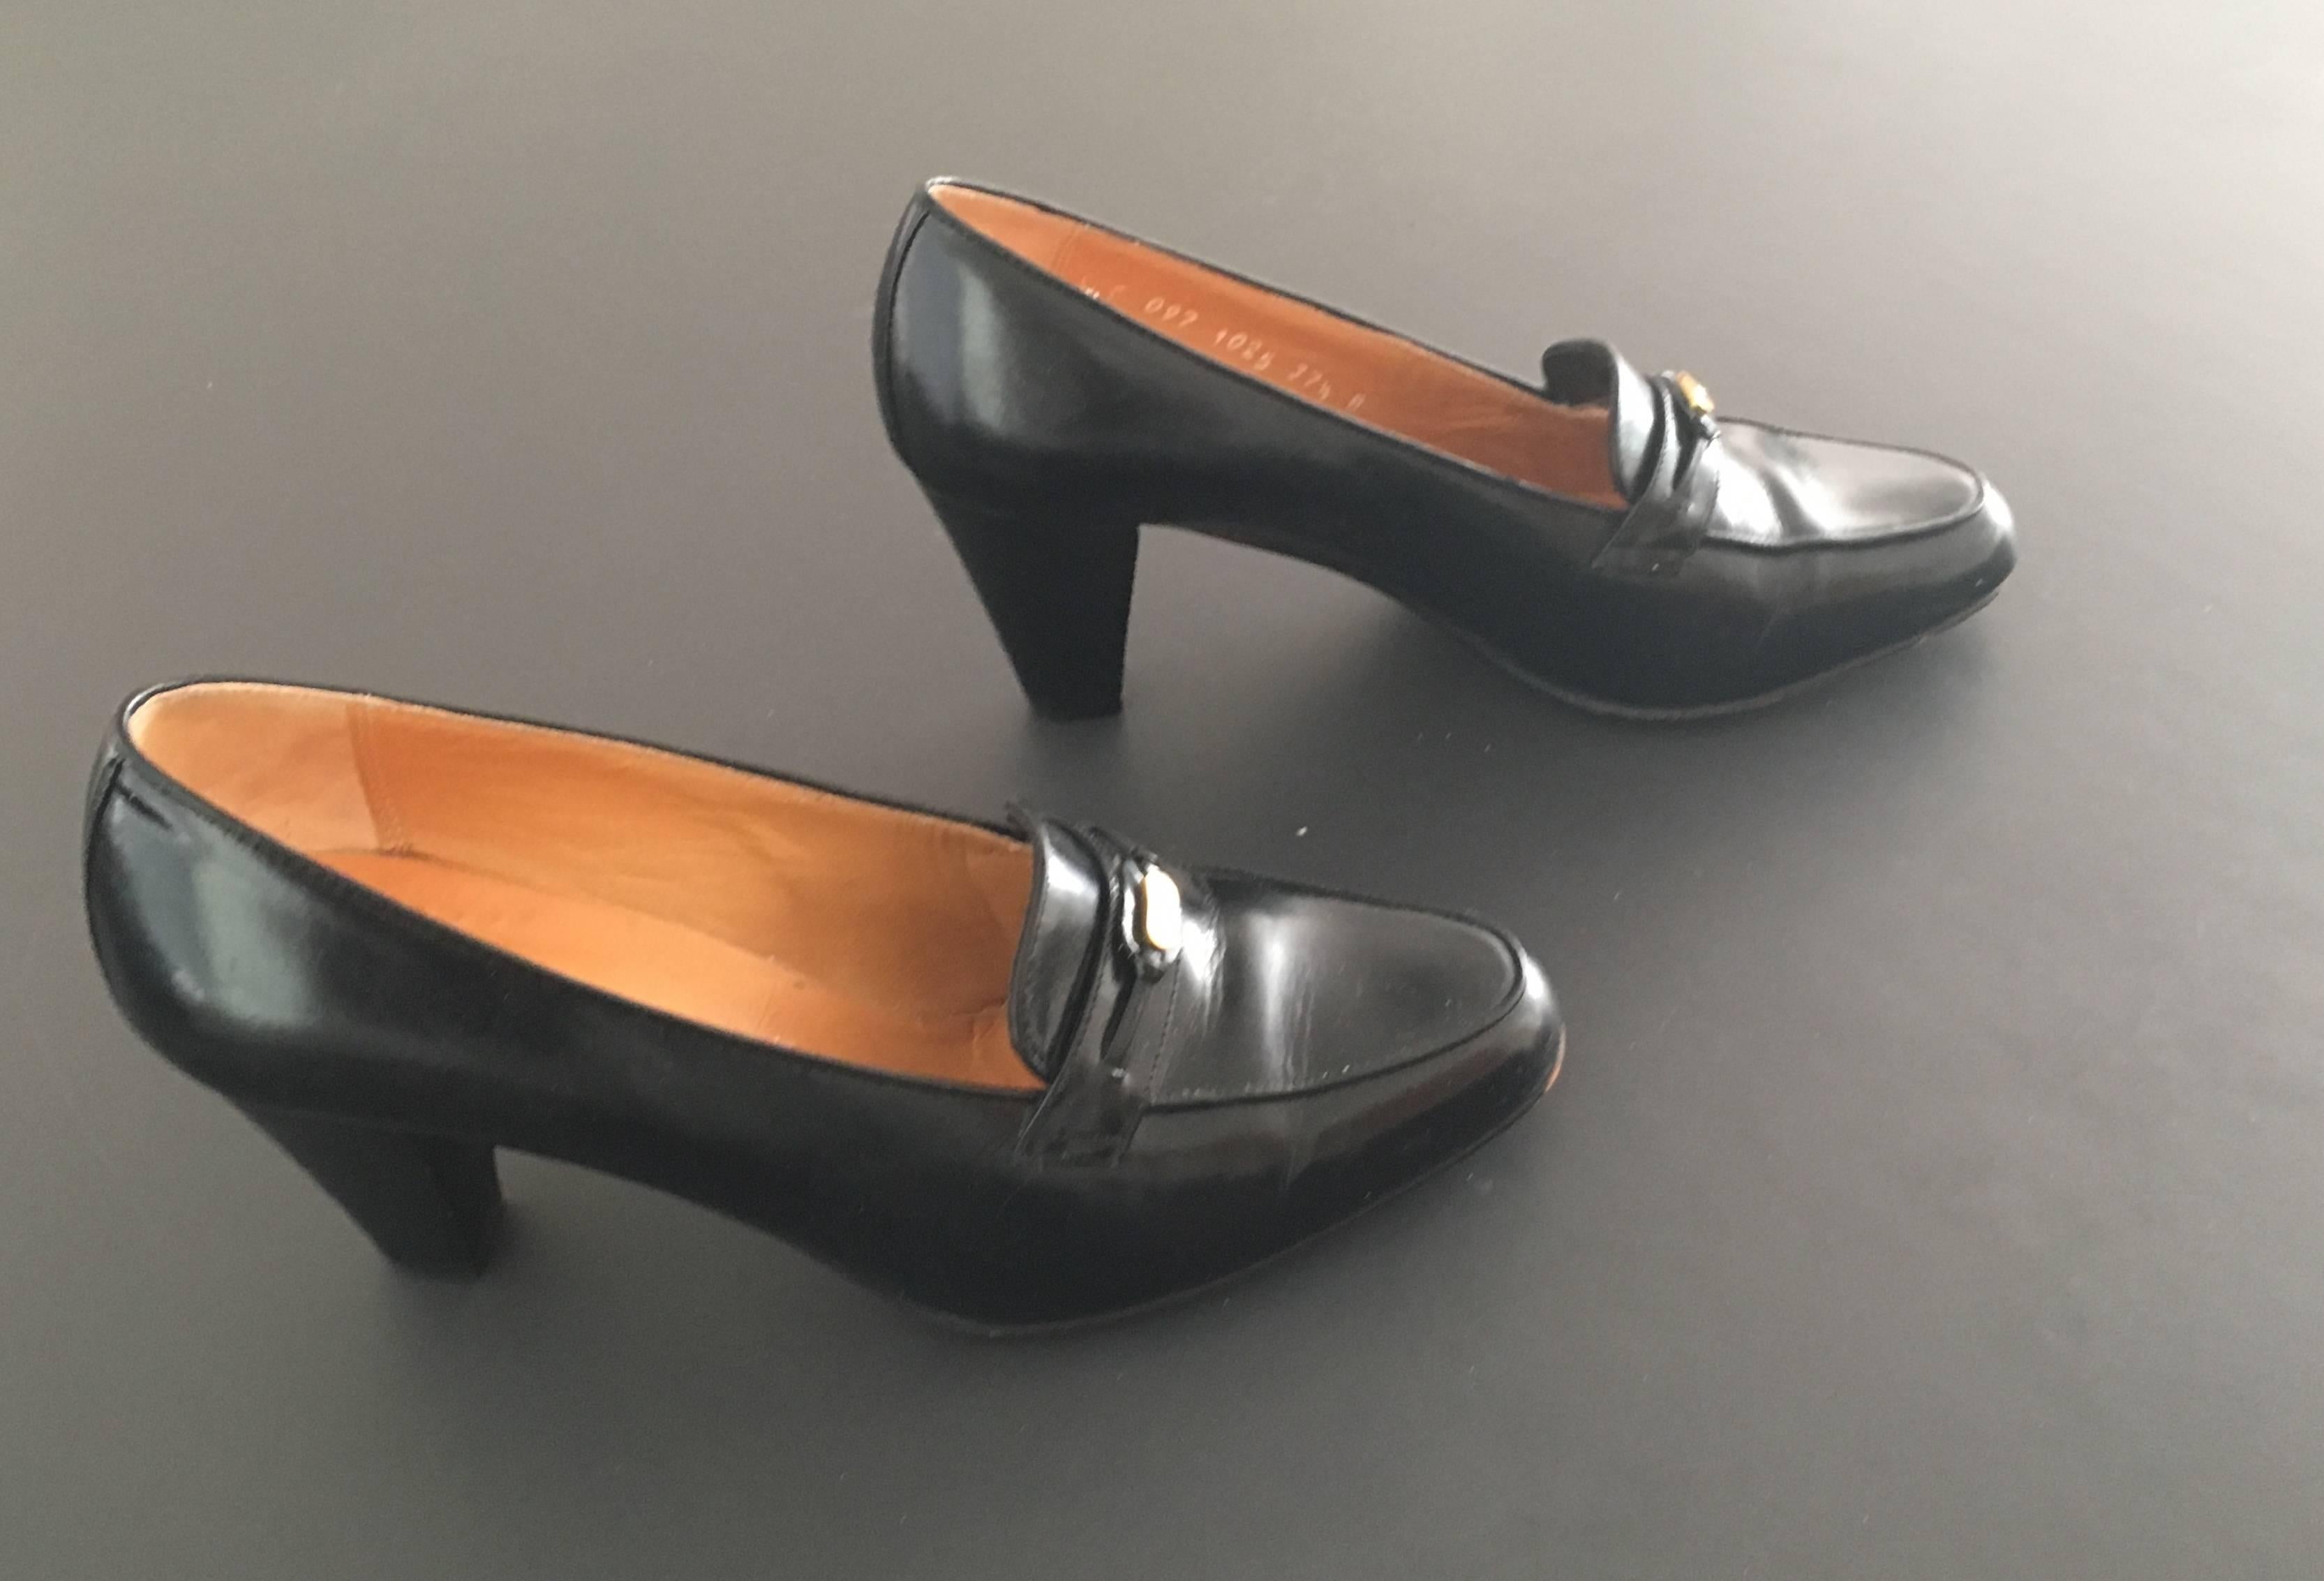 Gucci 1970s black leather heeled loafers is marked 37.1/2 B and fits an USA women's size 7. The woman who consigned these shoes wears a size 7 and these fit her perfectly.  Wear these classic Gucci loafers with jeans, pants, skirts or suits.